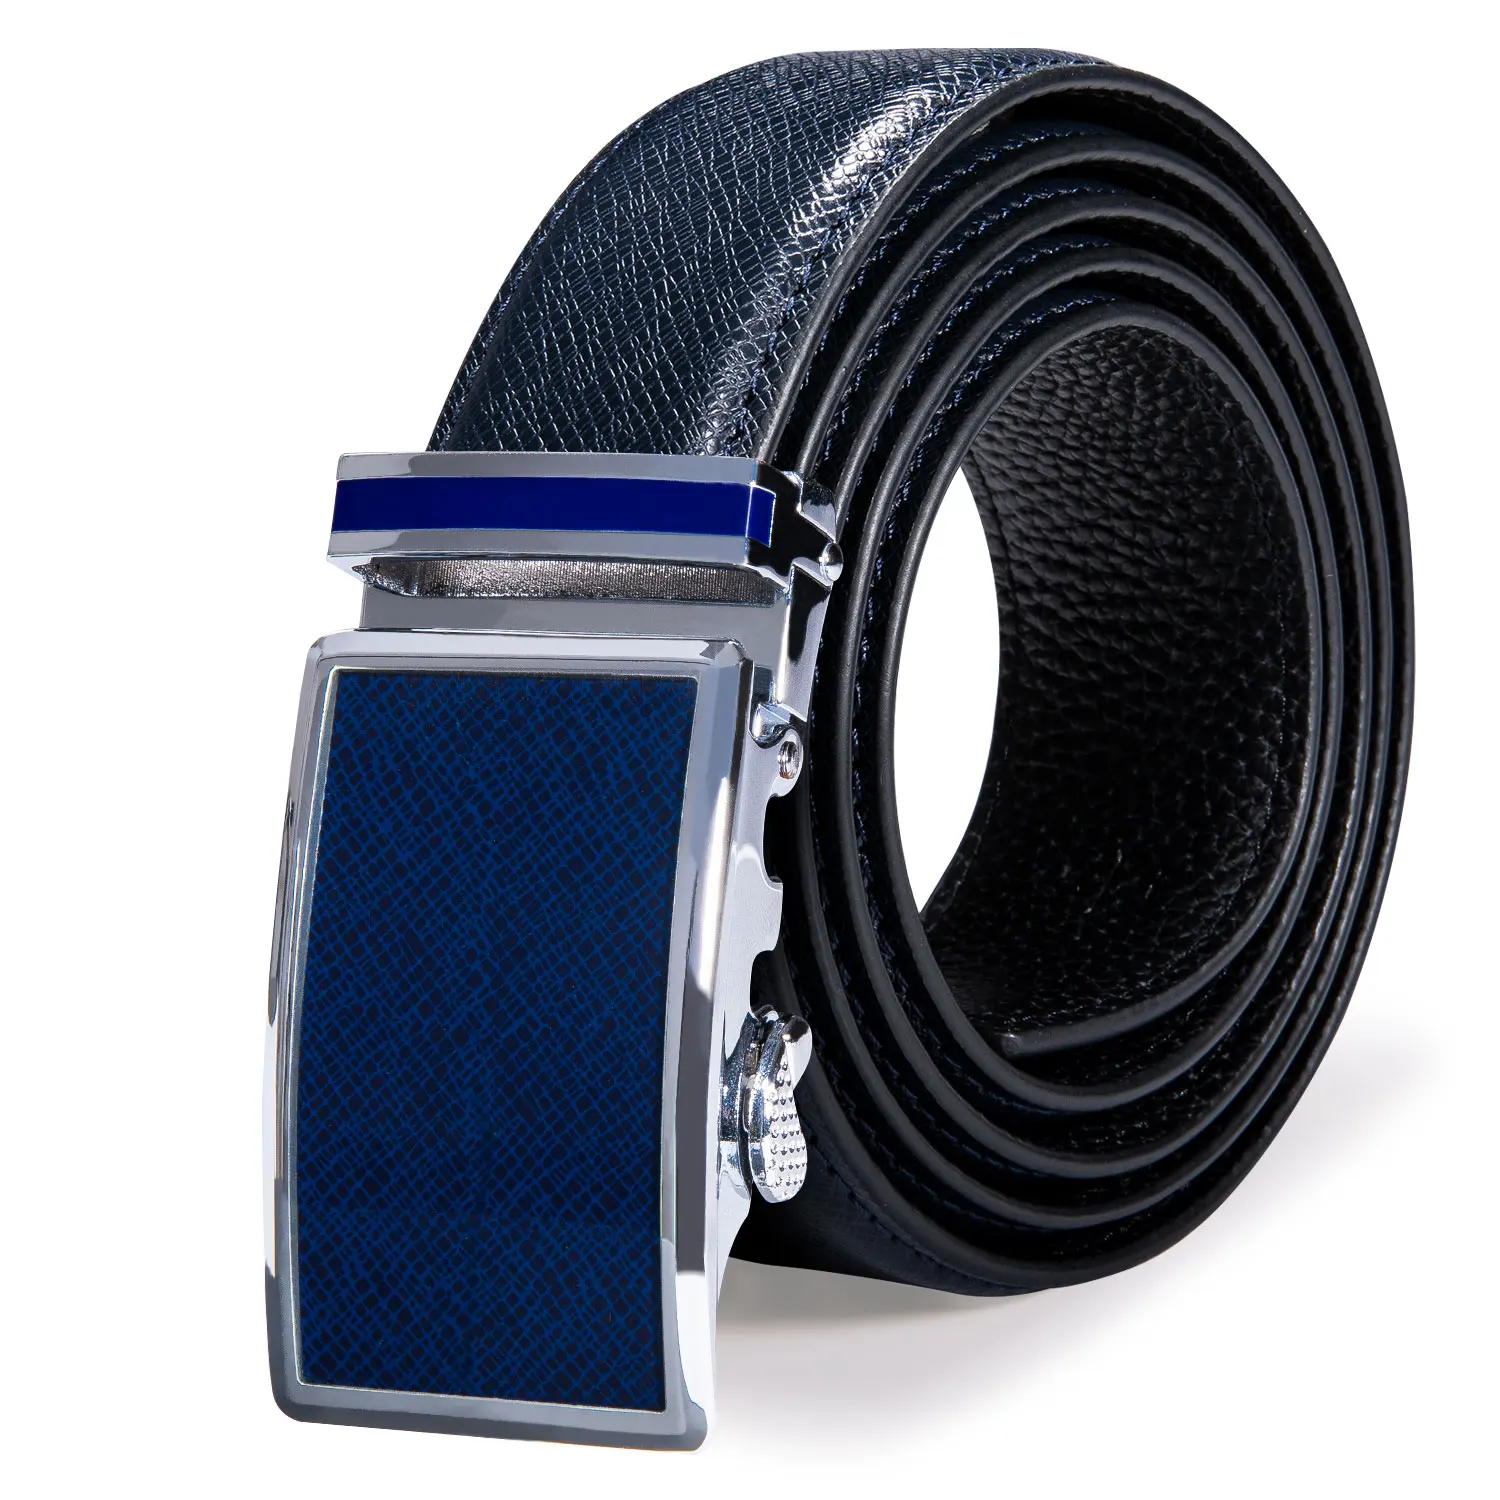 Fashion Accessories Belt Men Luxury Automatic Metal Buckle Royal Blue Cowhide Genuine Leather Belts Gift Box Barry.Wang DK-2201